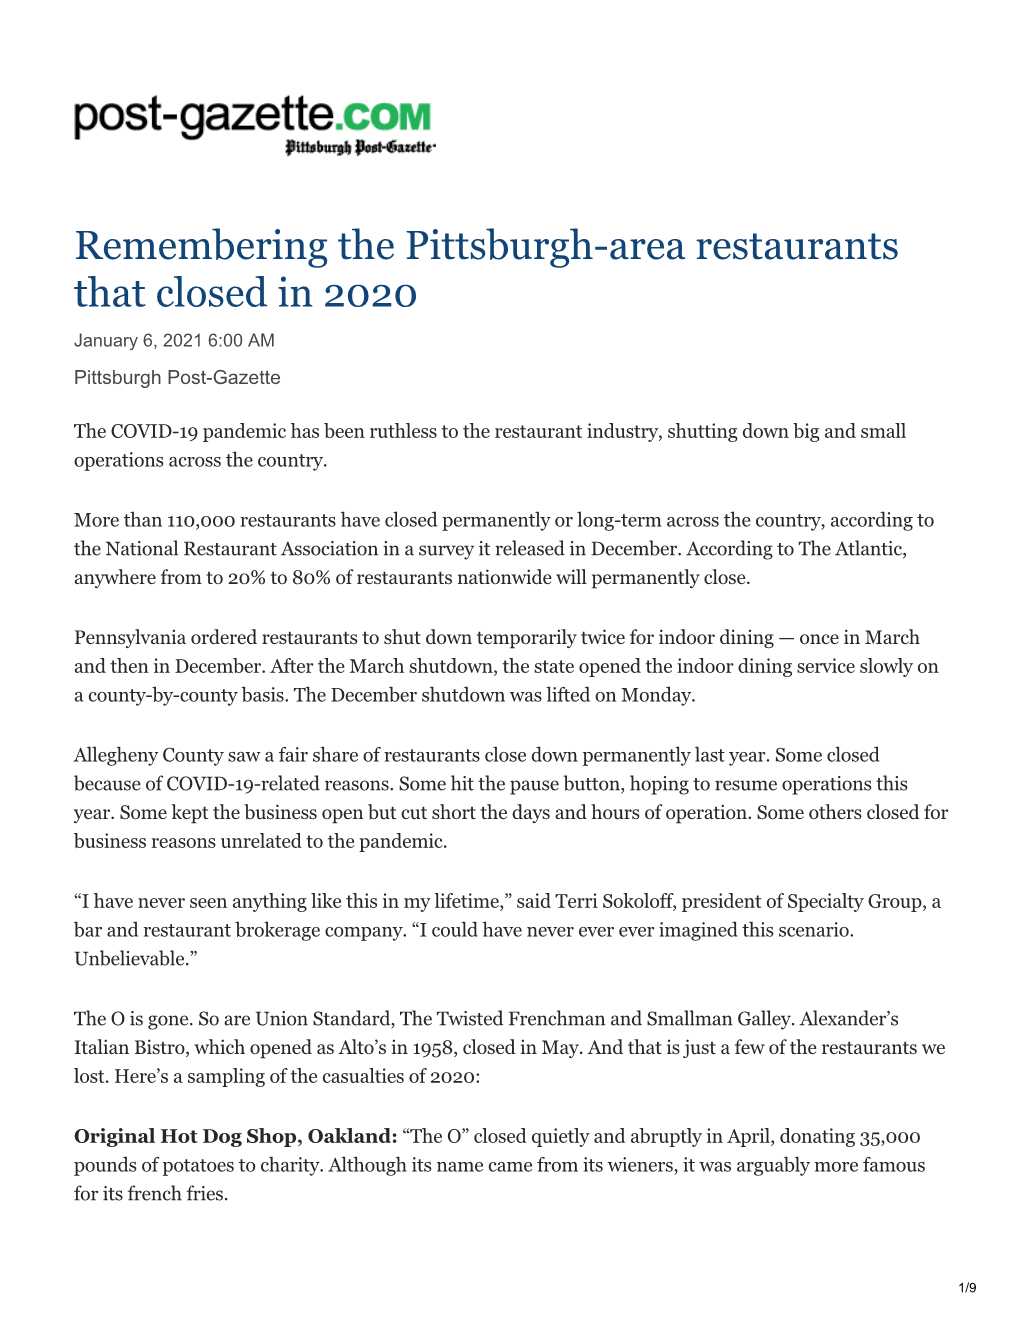 Remembering the Pittsburgh-Area Restaurants That Closed in 2020 January 6, 2021 6:00 AM Pittsburgh Post-Gazette